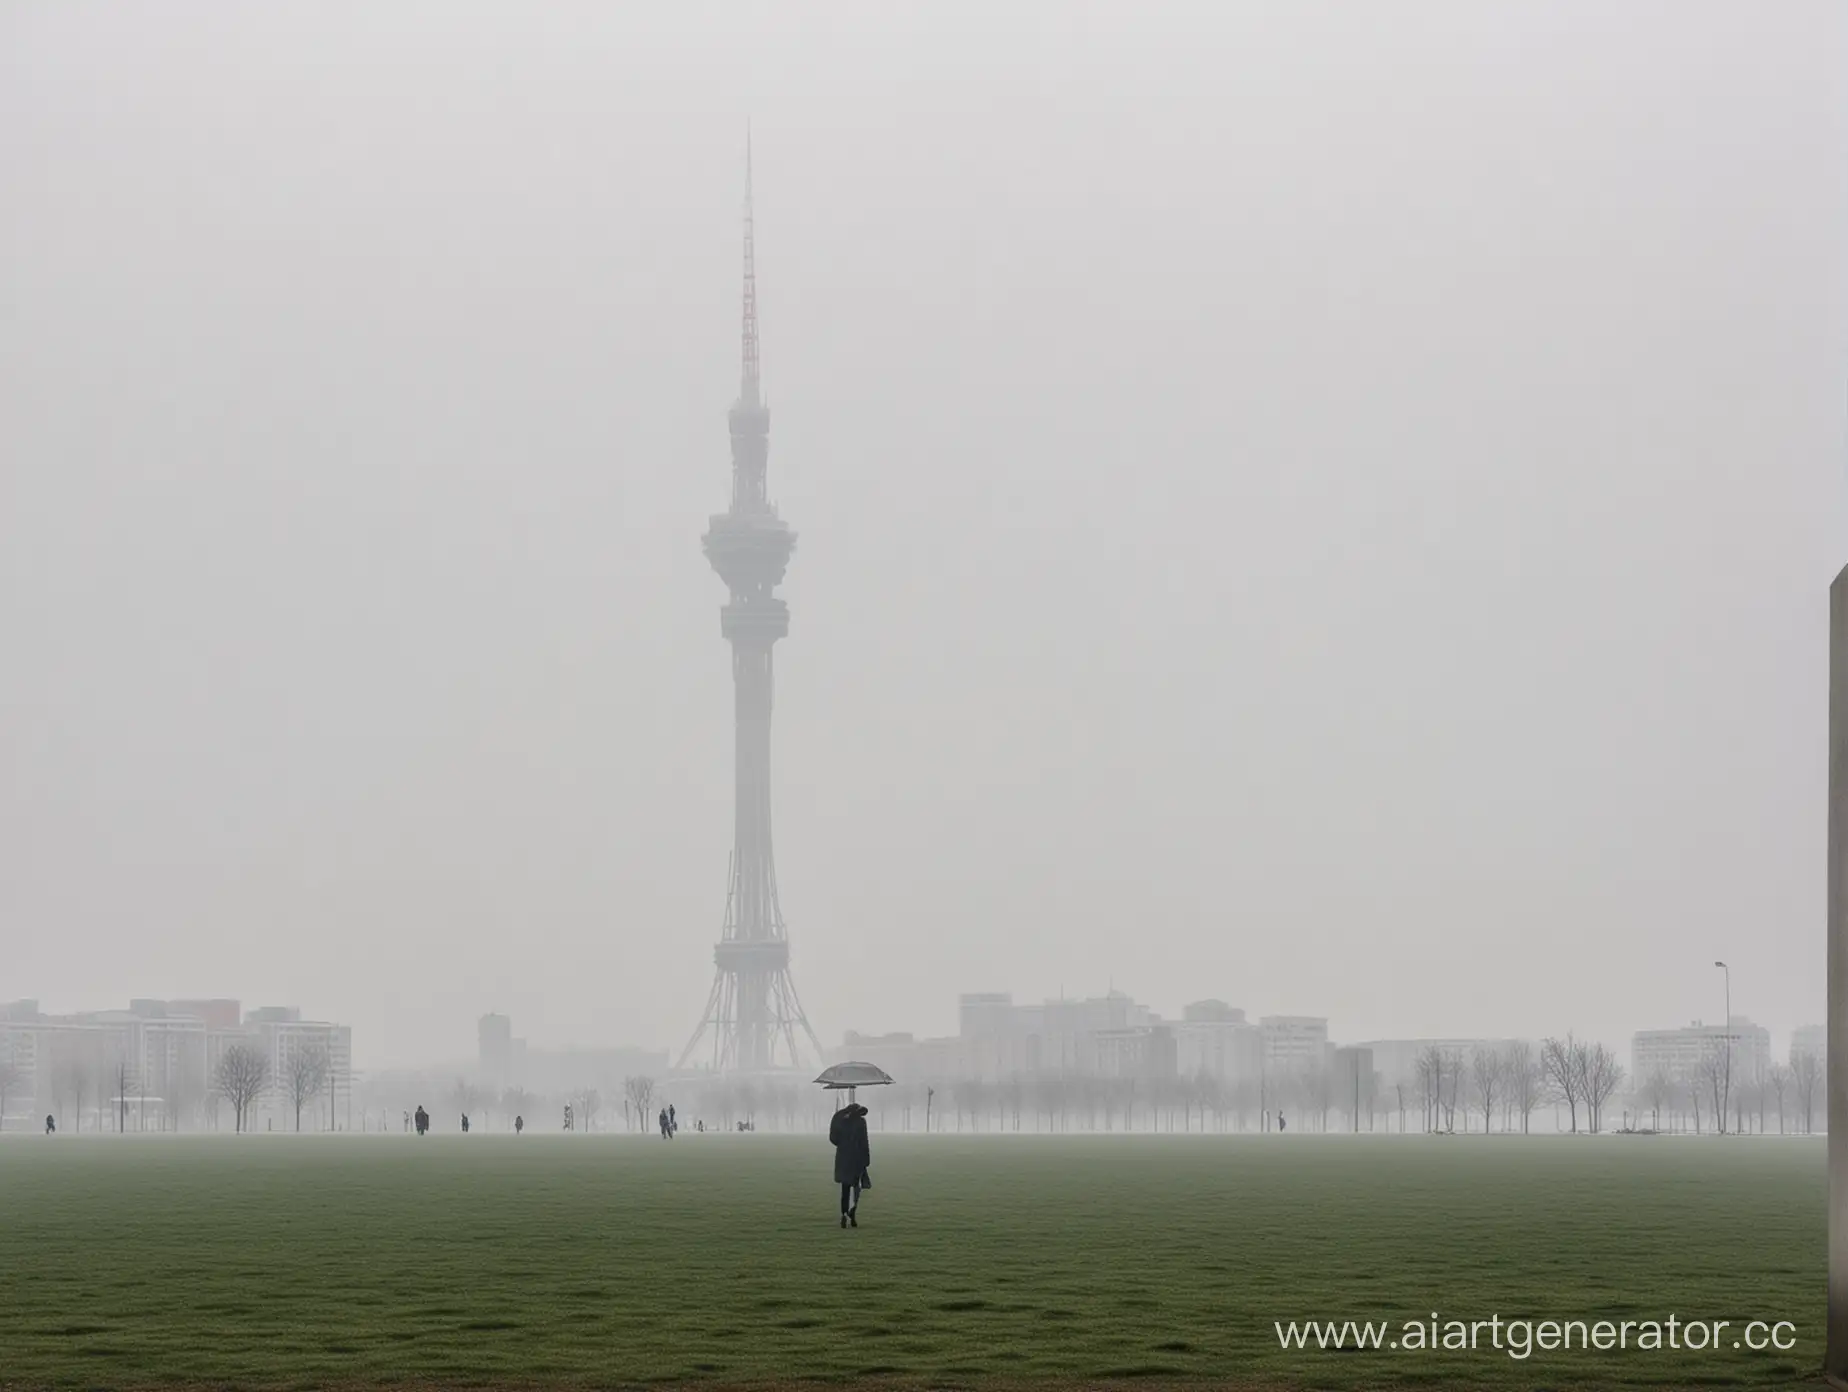 Mysterious-Tower-Emerges-from-Dense-Fog-as-Lone-Girl-Approaches